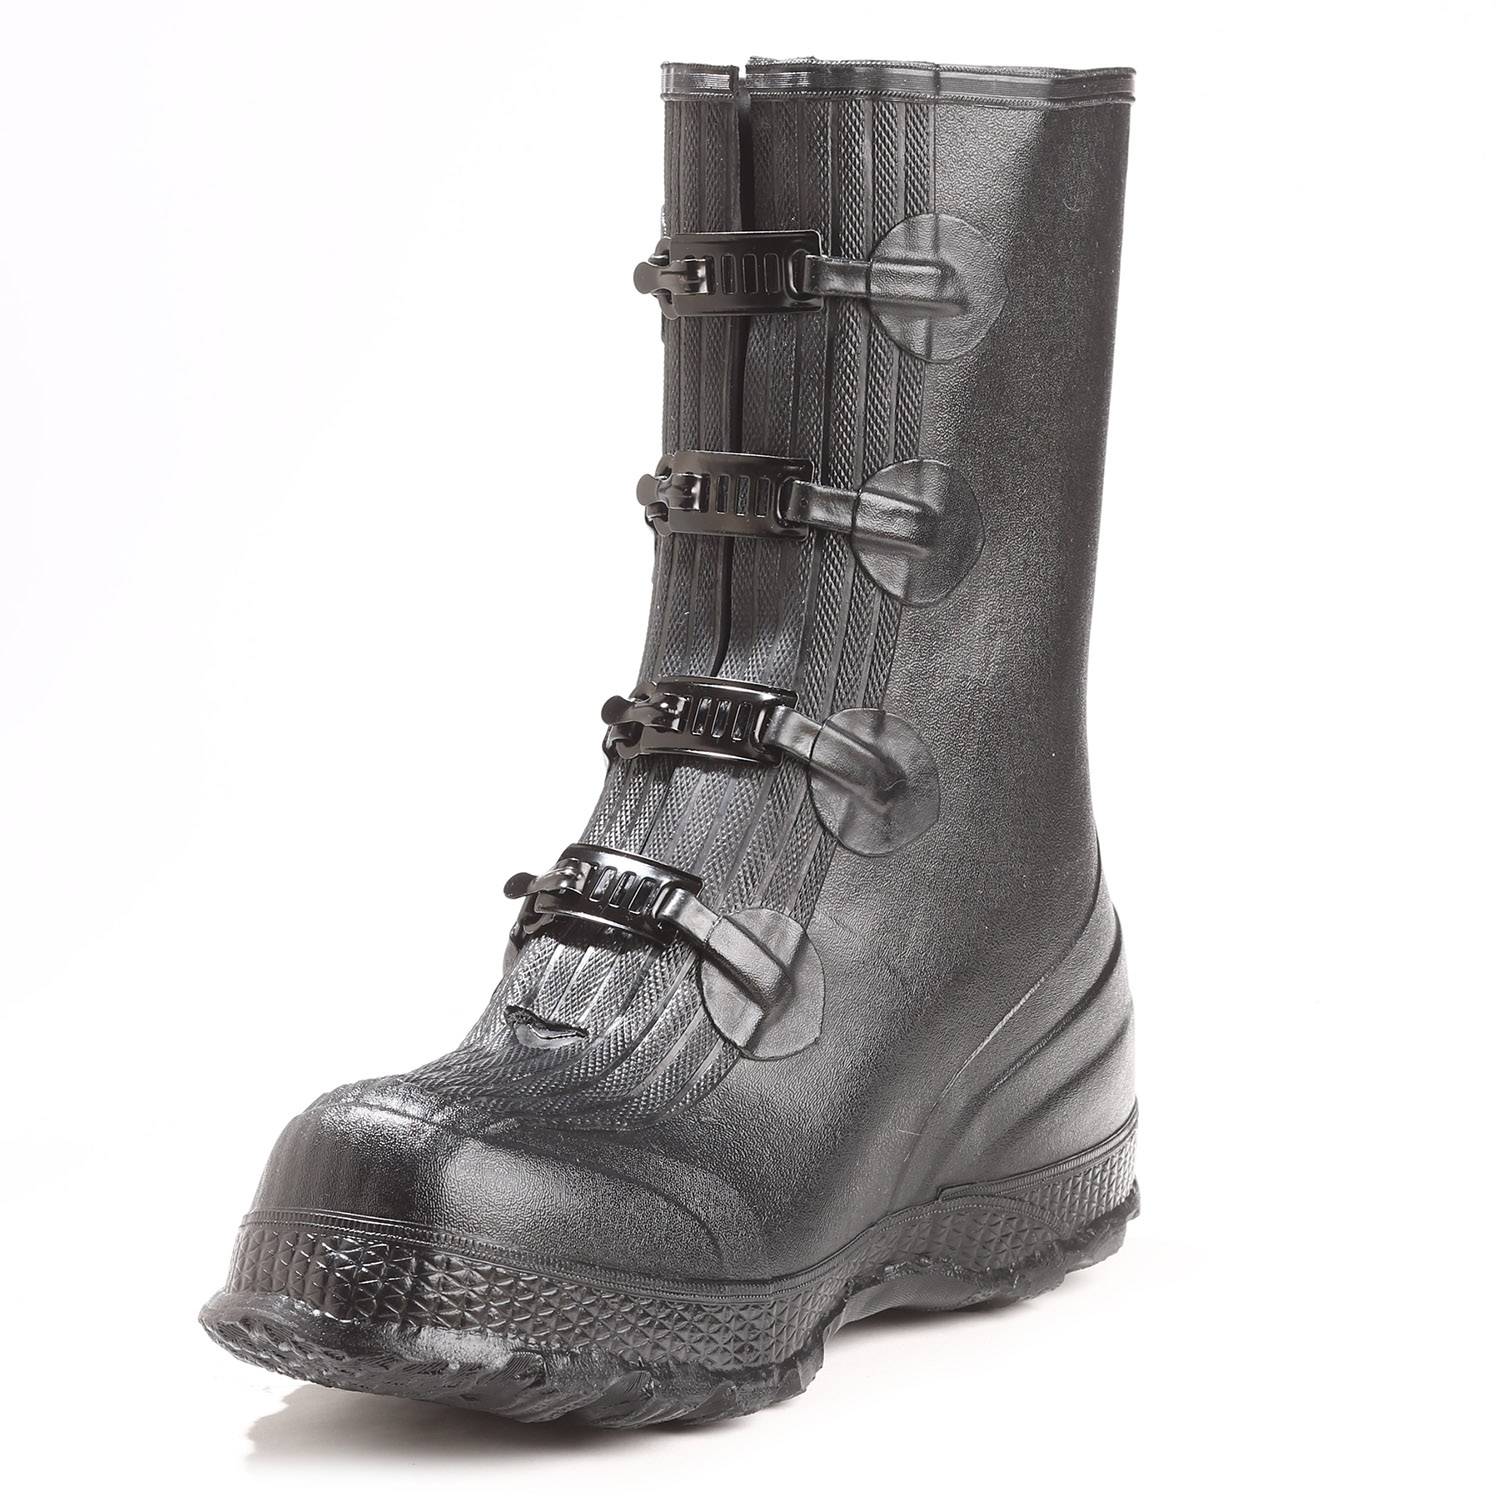 4 buckle rubber boots